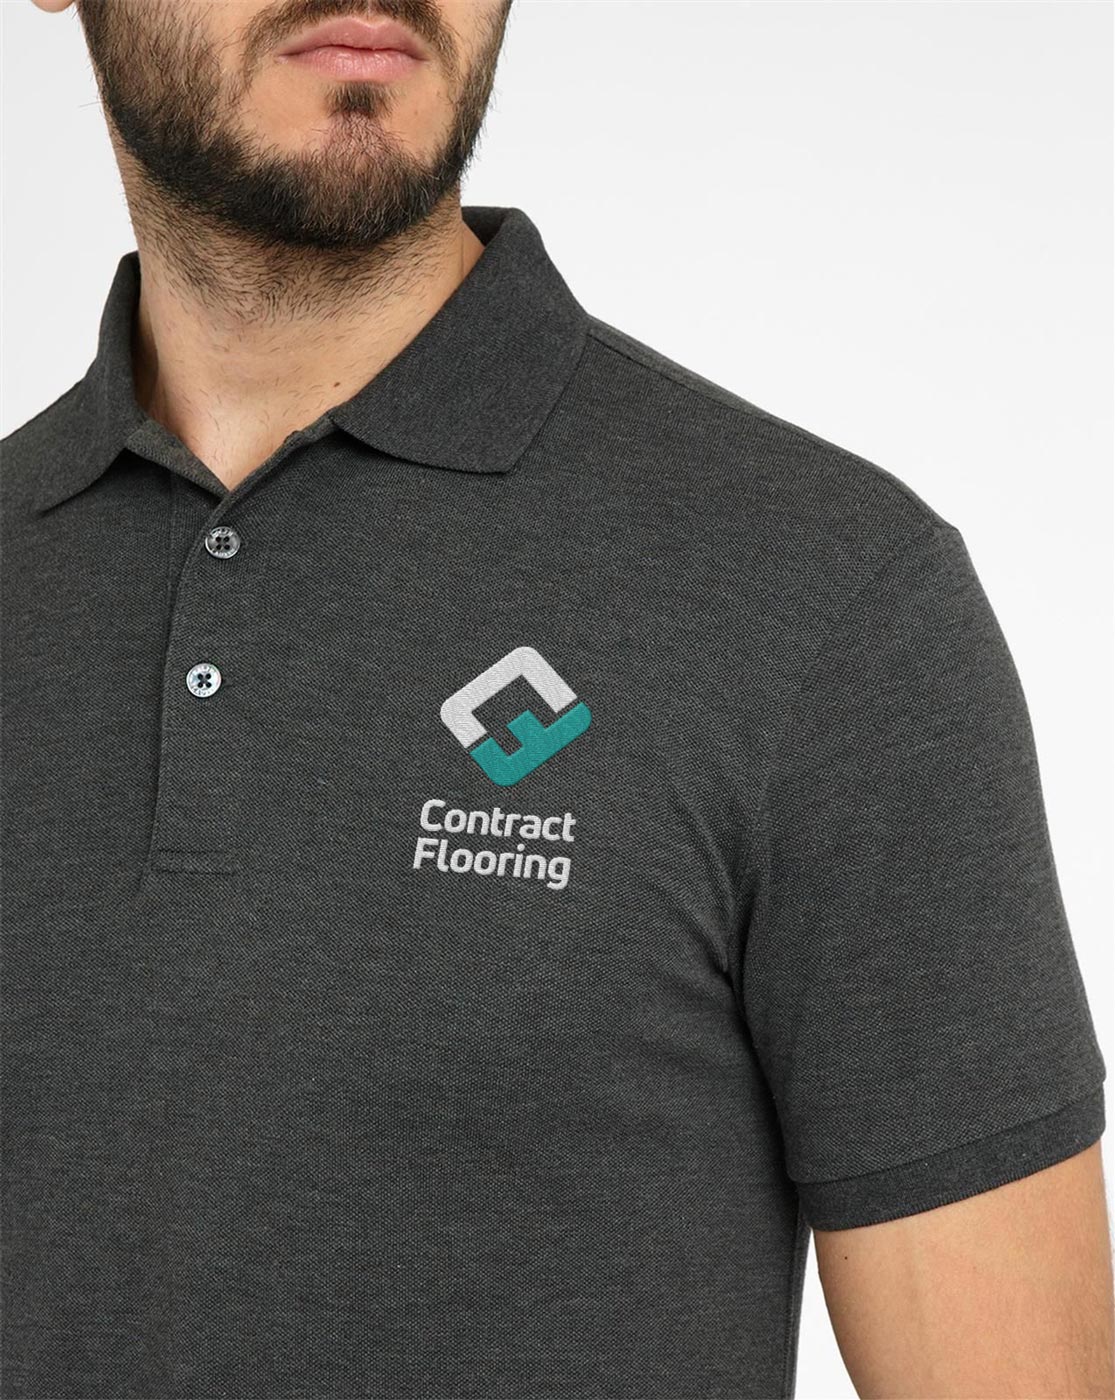 contract-flooring-charcoal-polo-logo-design-embroidery